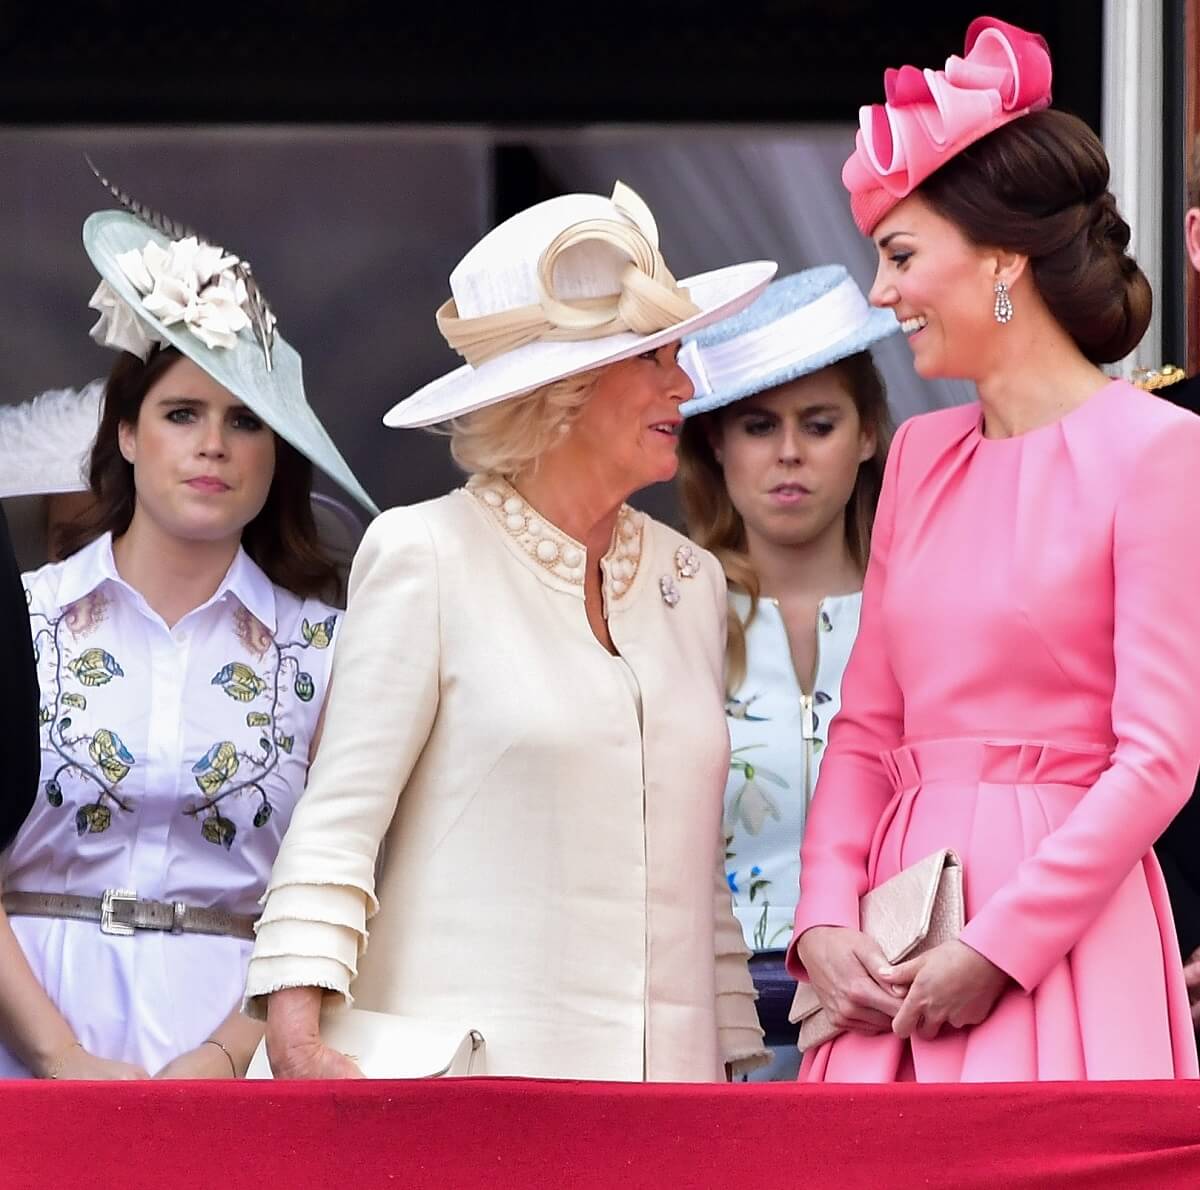 Princess Eugenie, Camilla Parker Bowles, and Kate Middleton standing on the Buckingham Palace balcony